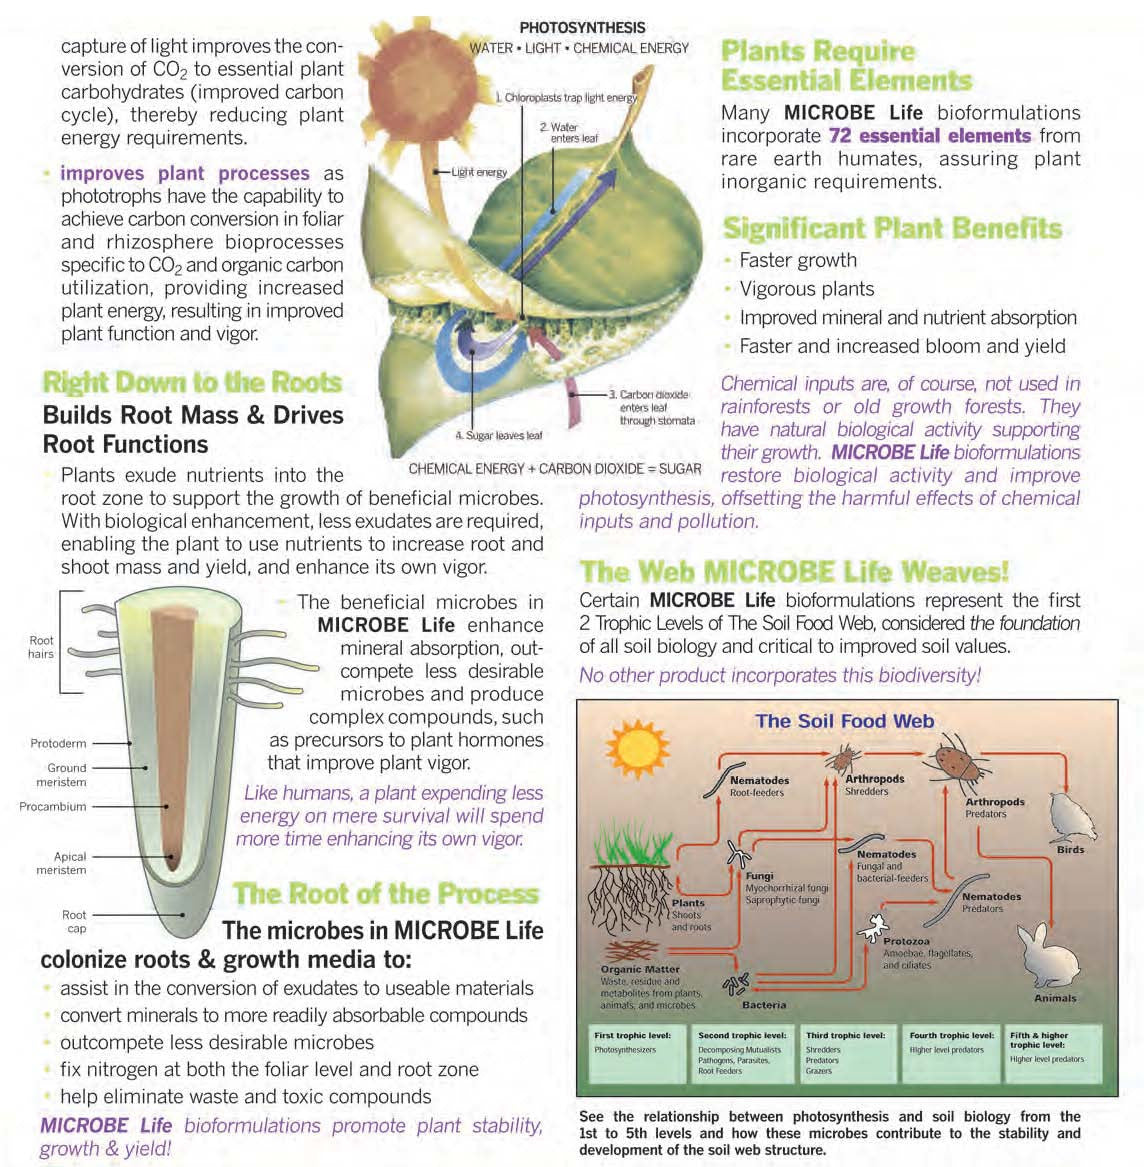 Second Page of An Introduction to Superior Technology Microbe Life Hydroponics